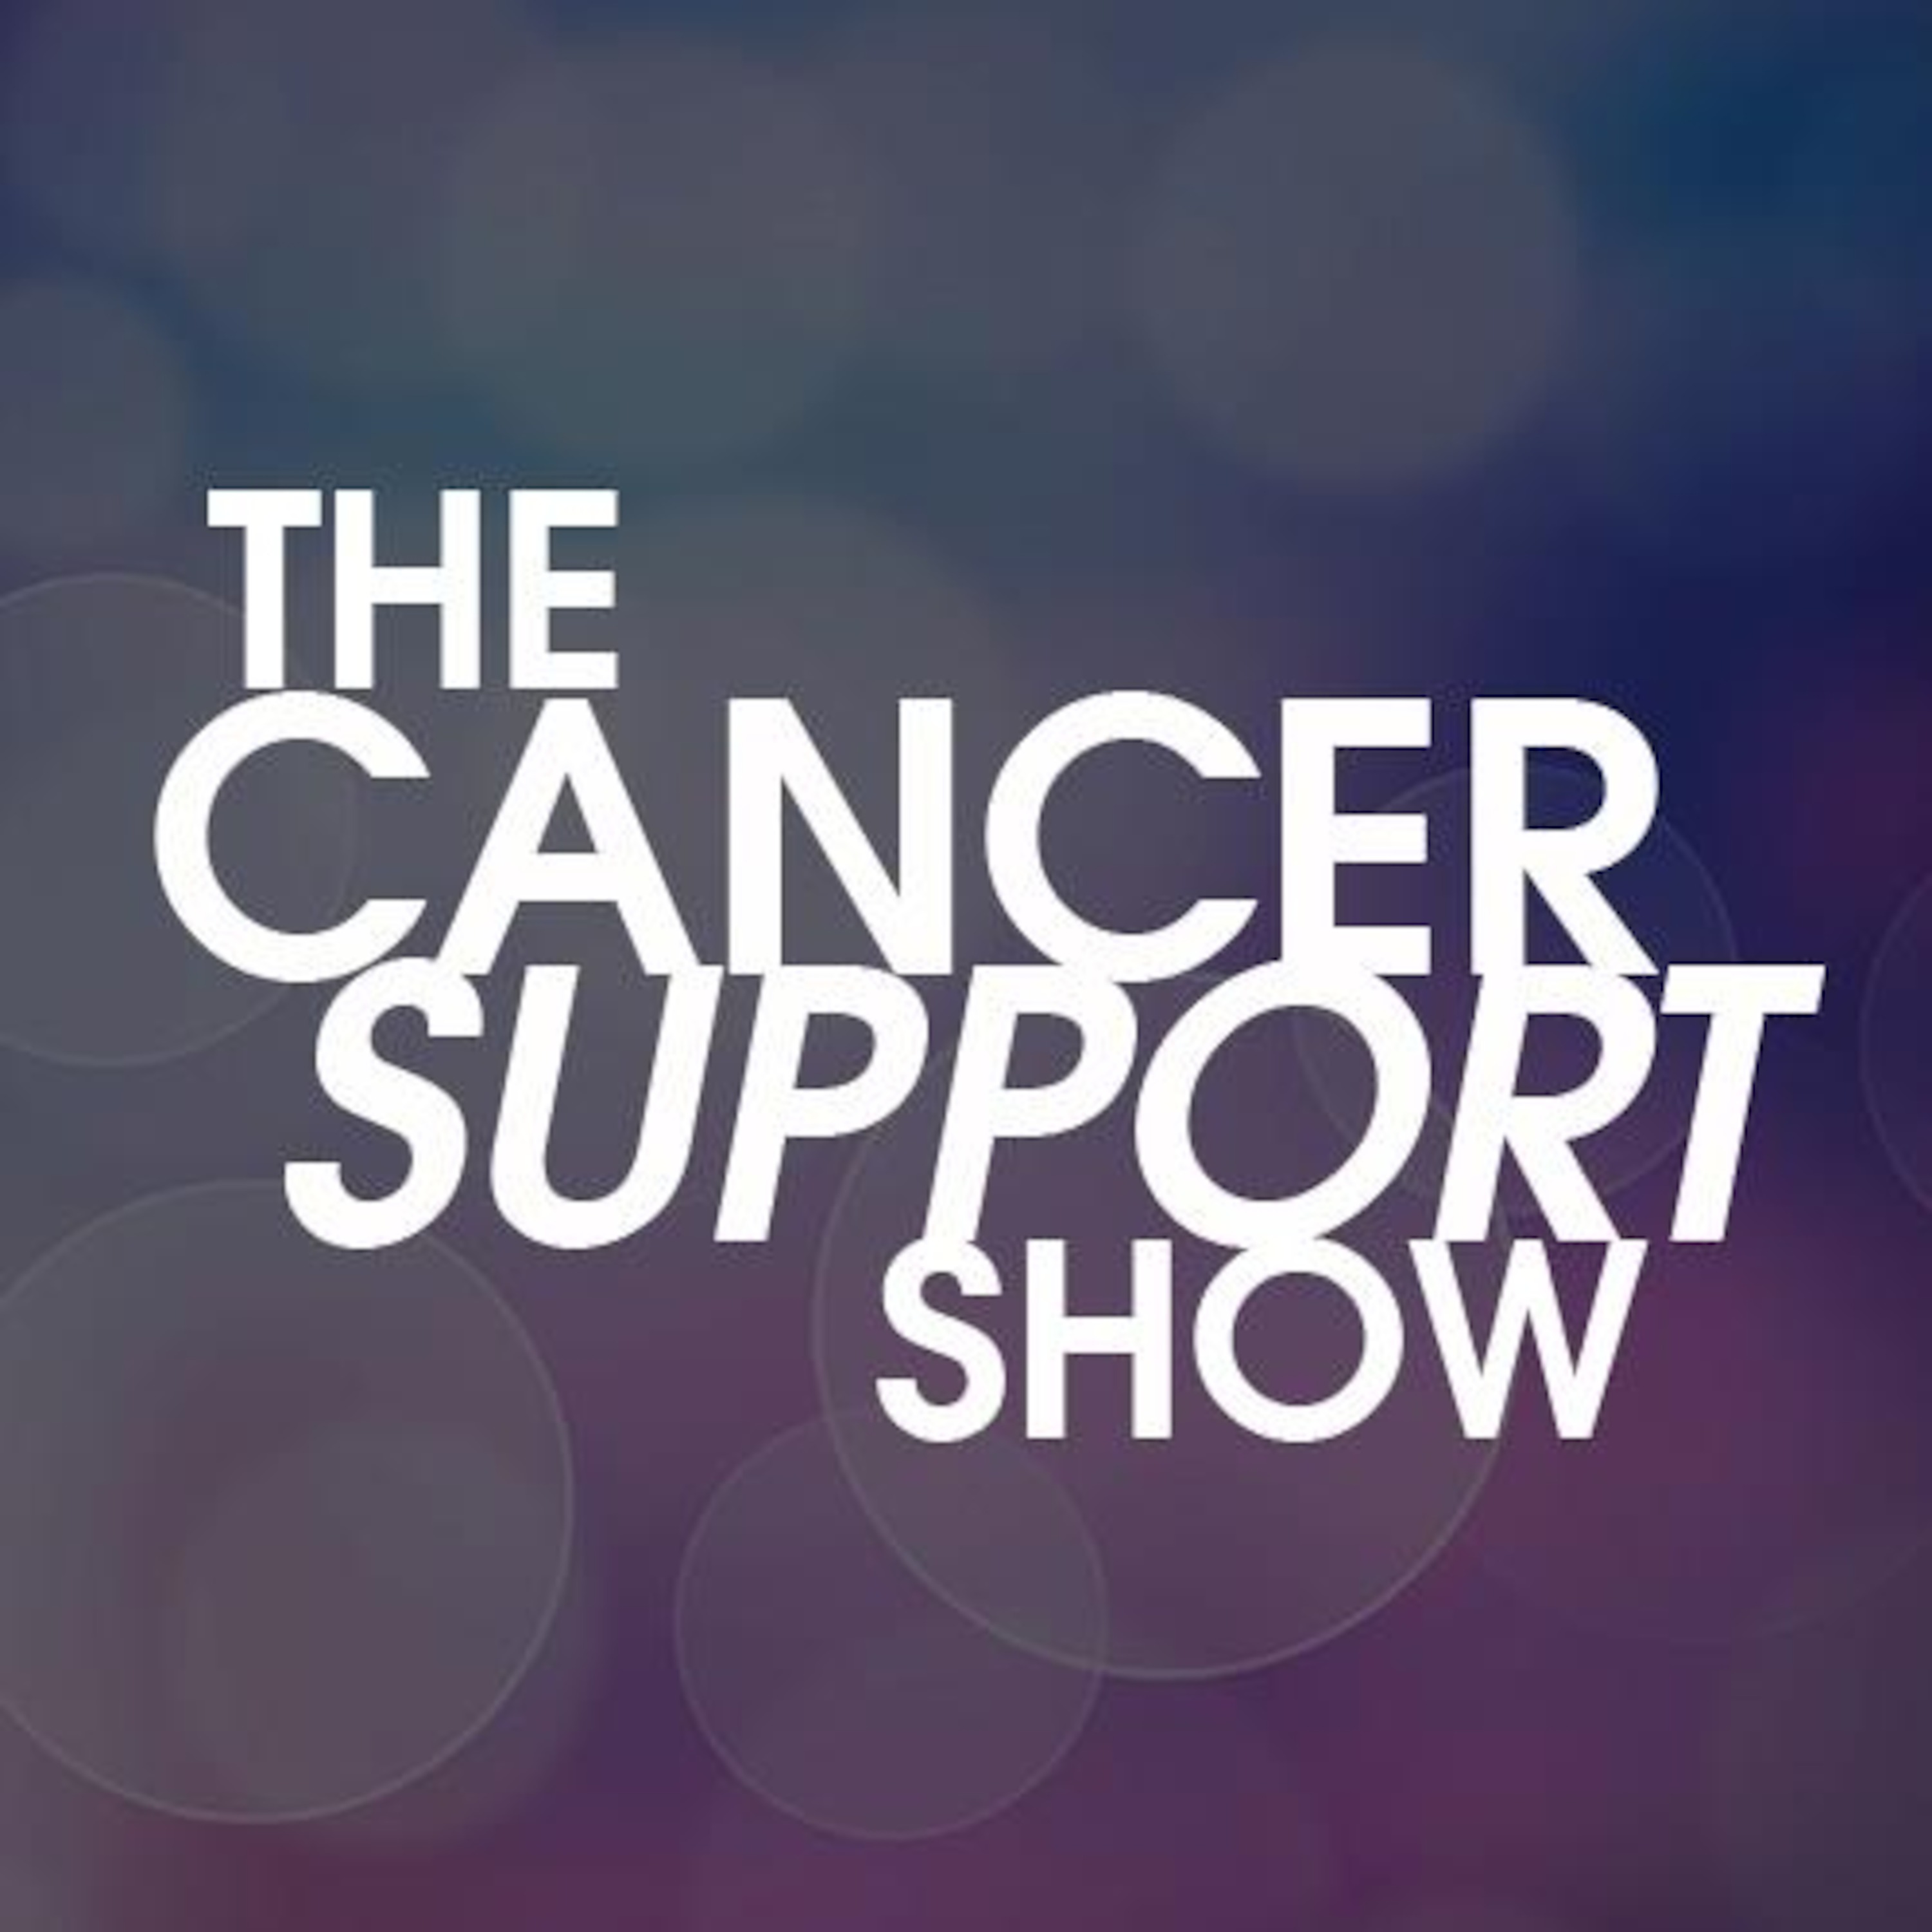 The Cancer Support Show